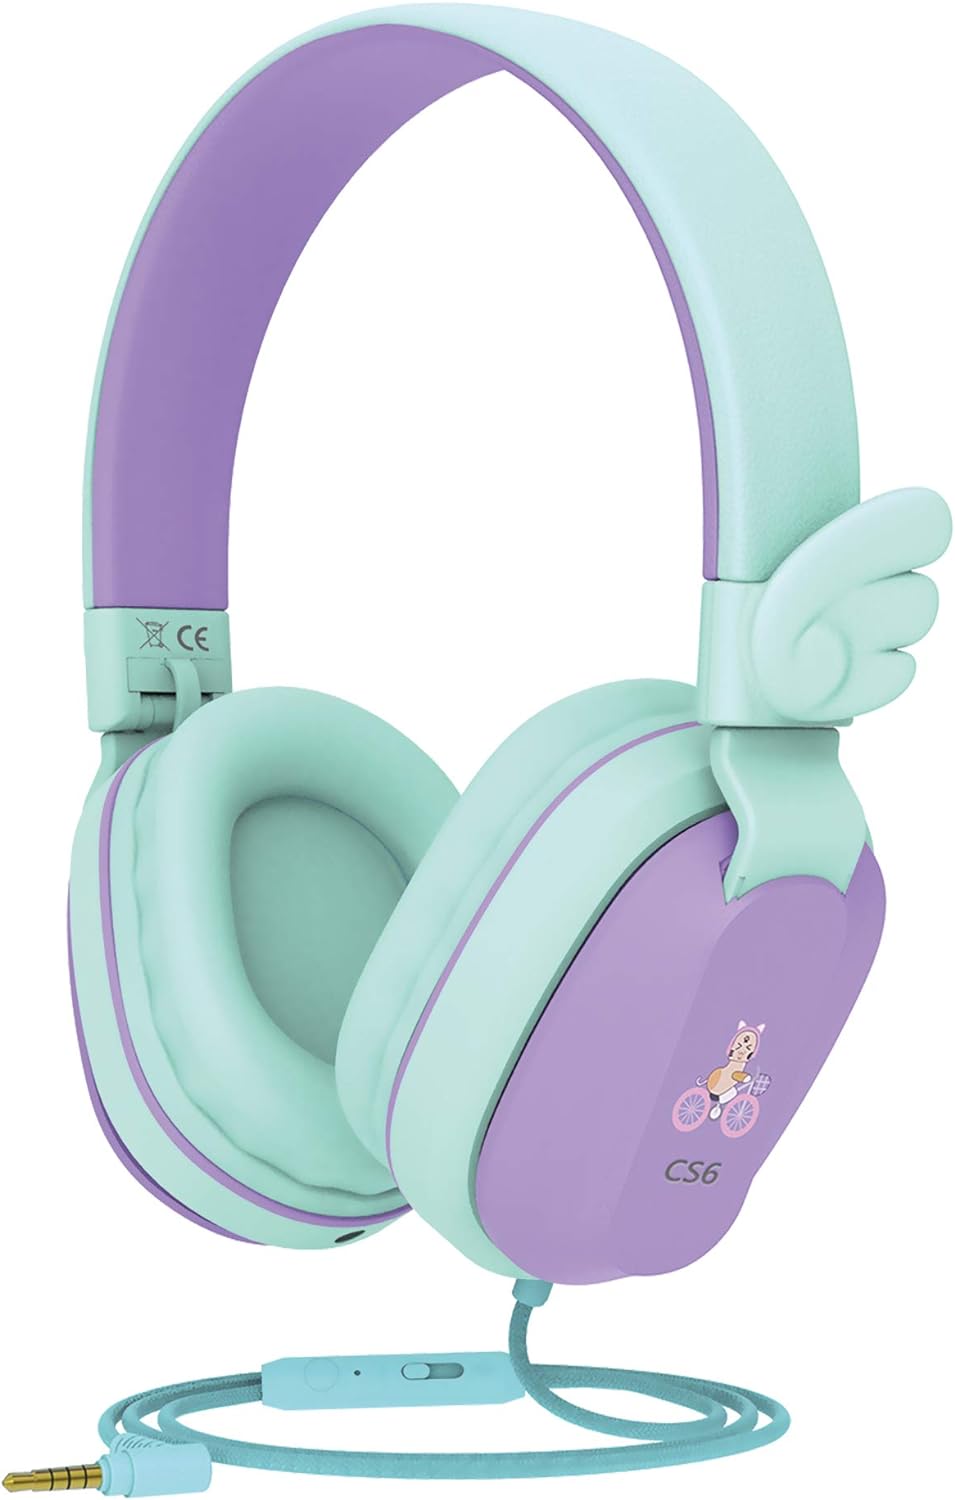 Riwbox Kids Headphones Wired,CS6 Stereo Sound Foldable Headphones for Kids Over Ear Toddler Headphones with Mic and Volume Control Compatible for Smartphones, PC and Tablets